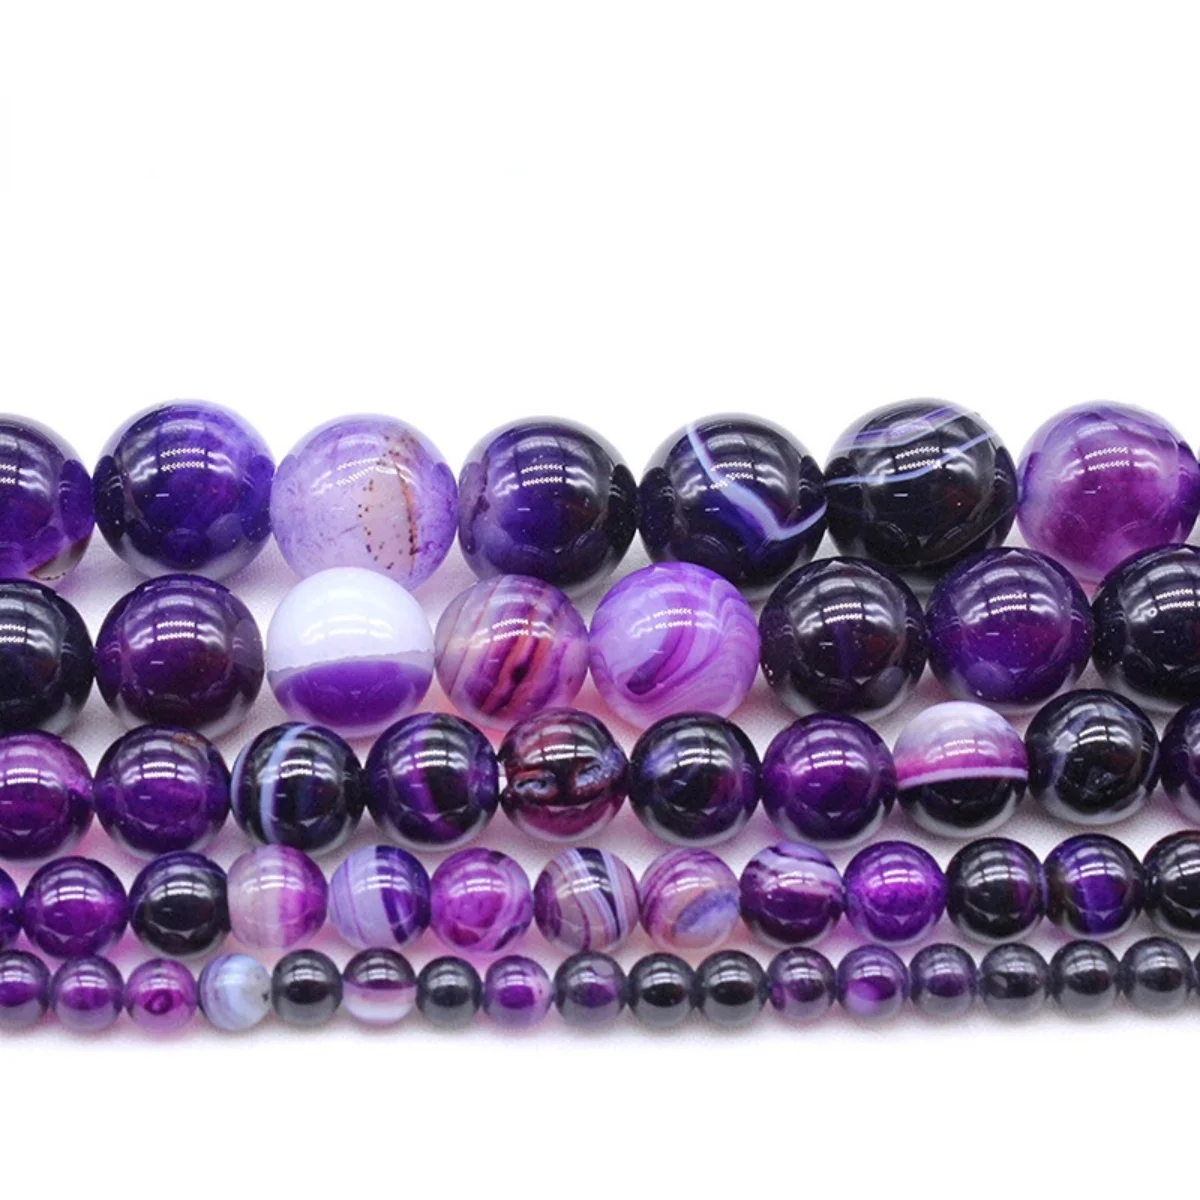 

Natural Stone Lines Wrapped Purple Agates Loose Beads DIY Hand-strung Onyx Round Beads Earrings Bracelet Jewelry Making Design